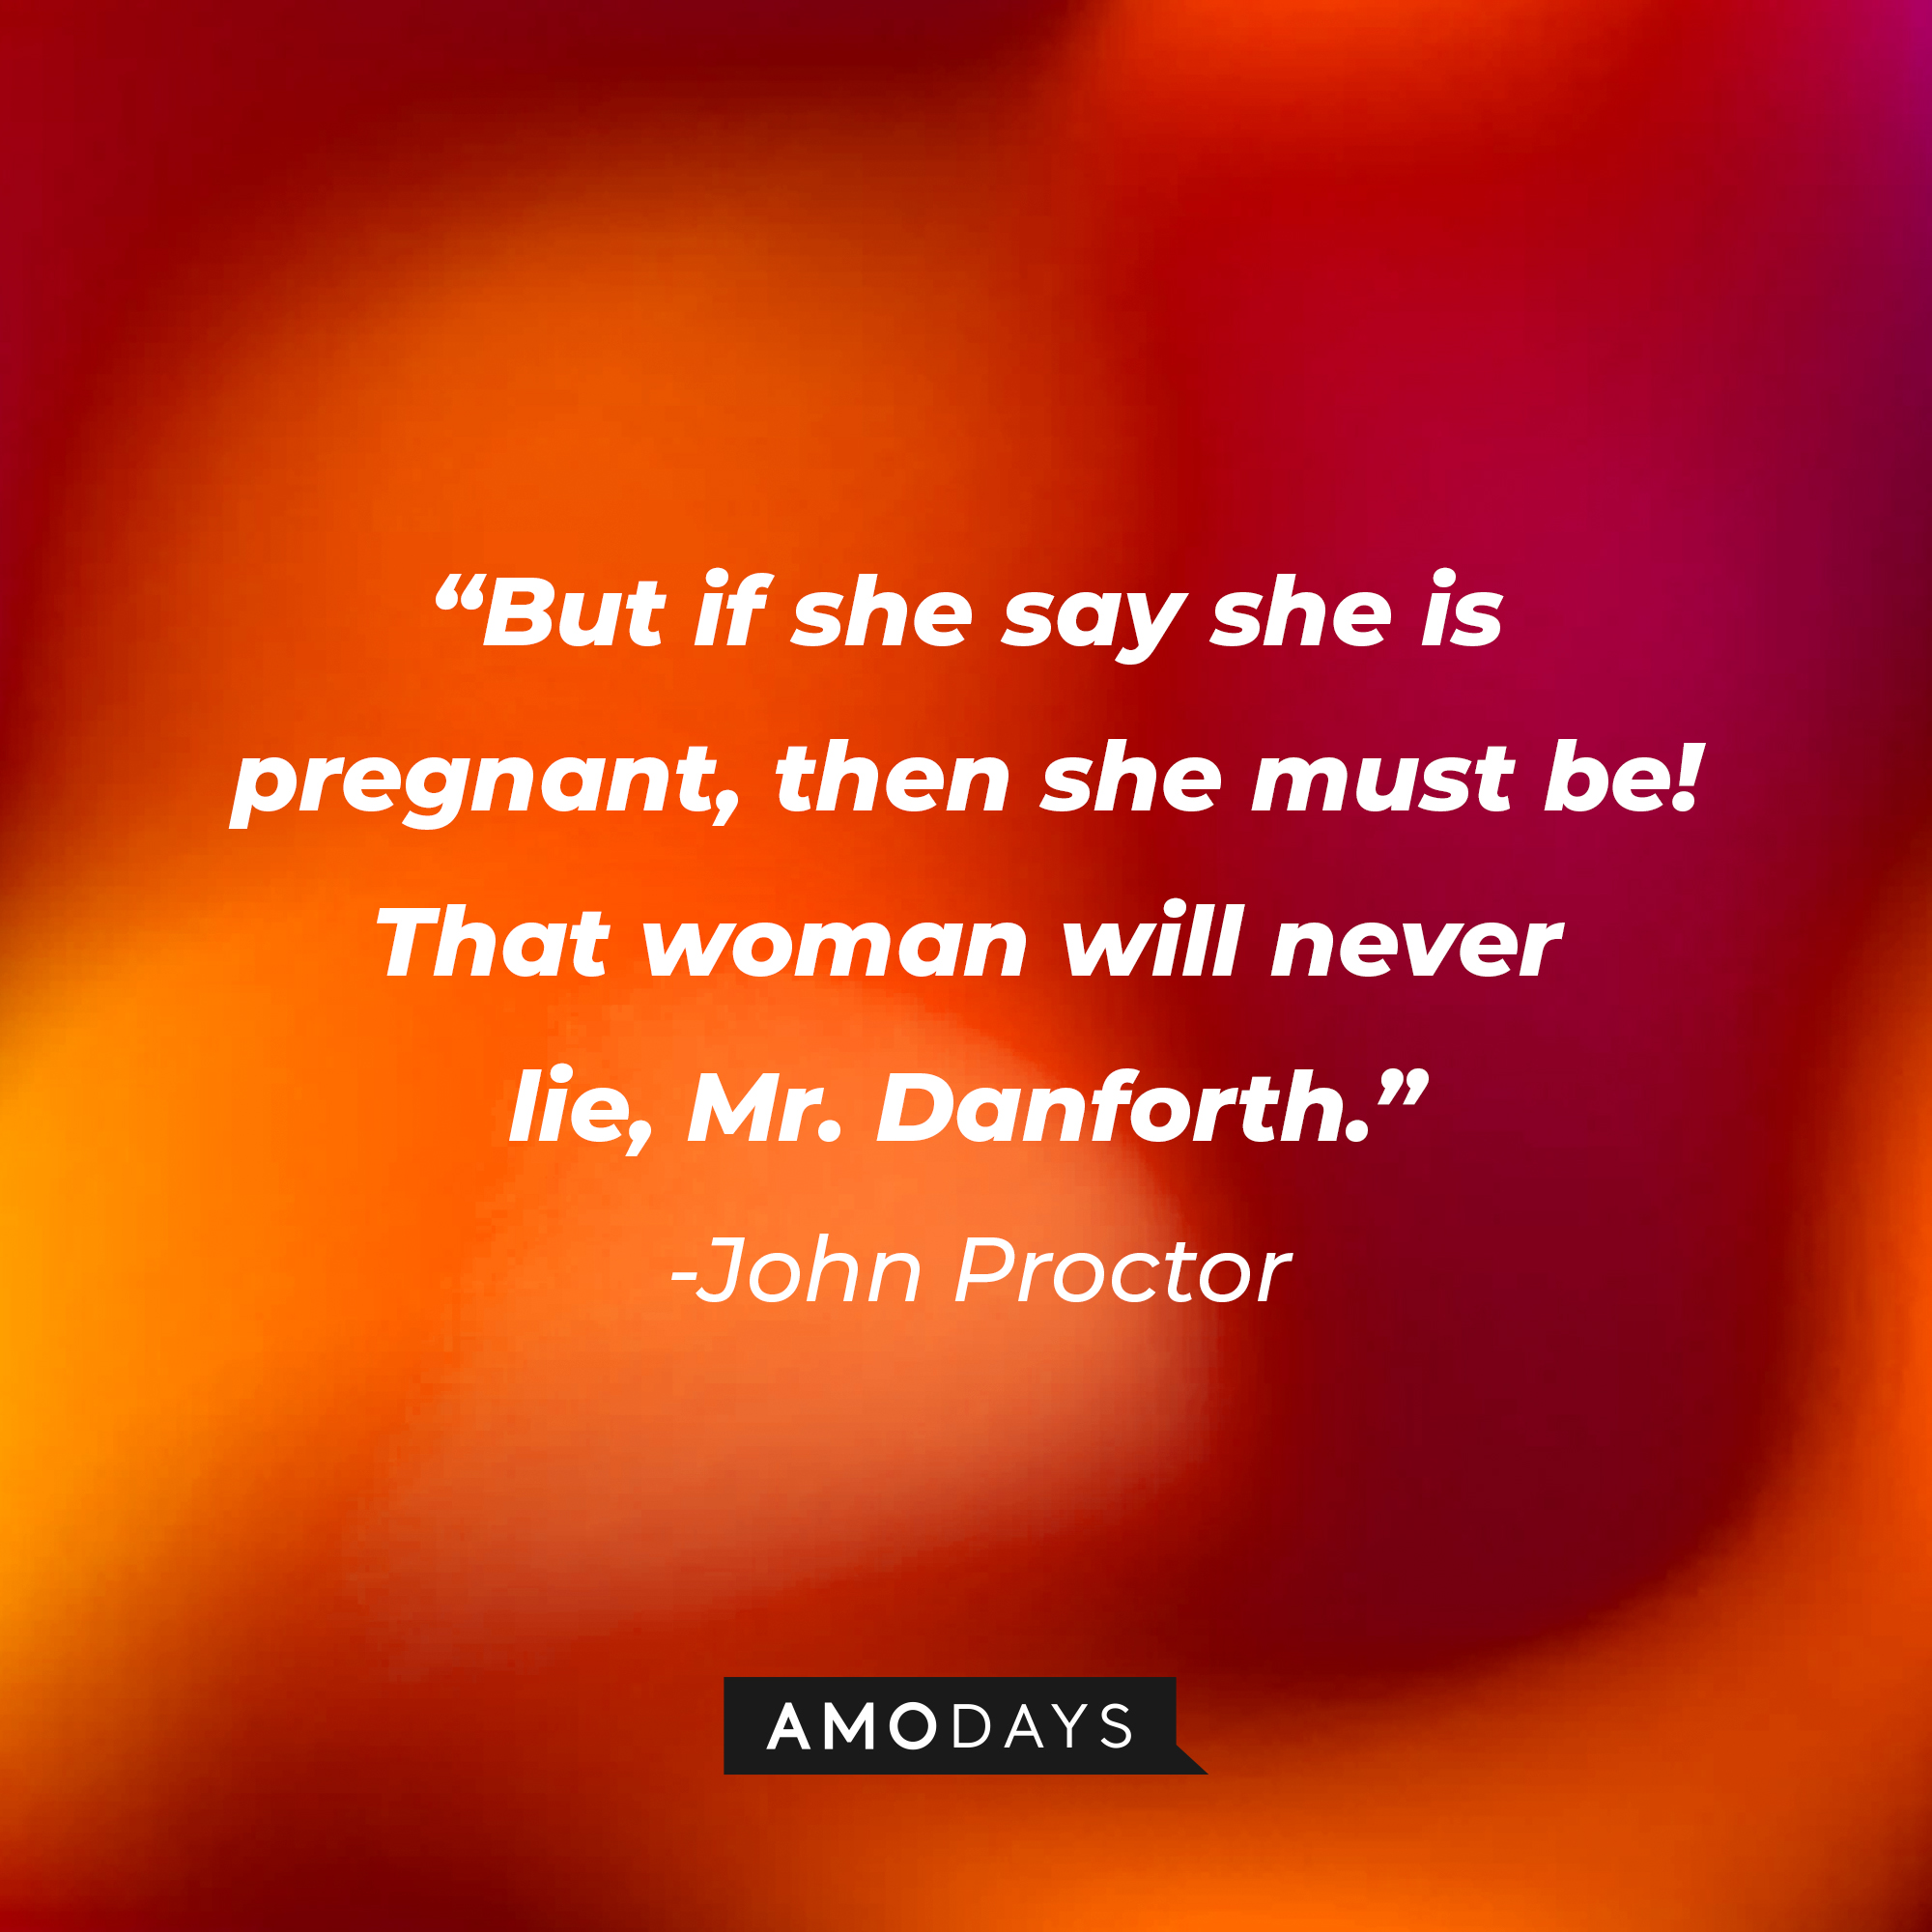 John Proctor's quote: "But if she say she is pregnant, then she must be! That woman will never lie, Mr. Danforth." | Image: AmoDays